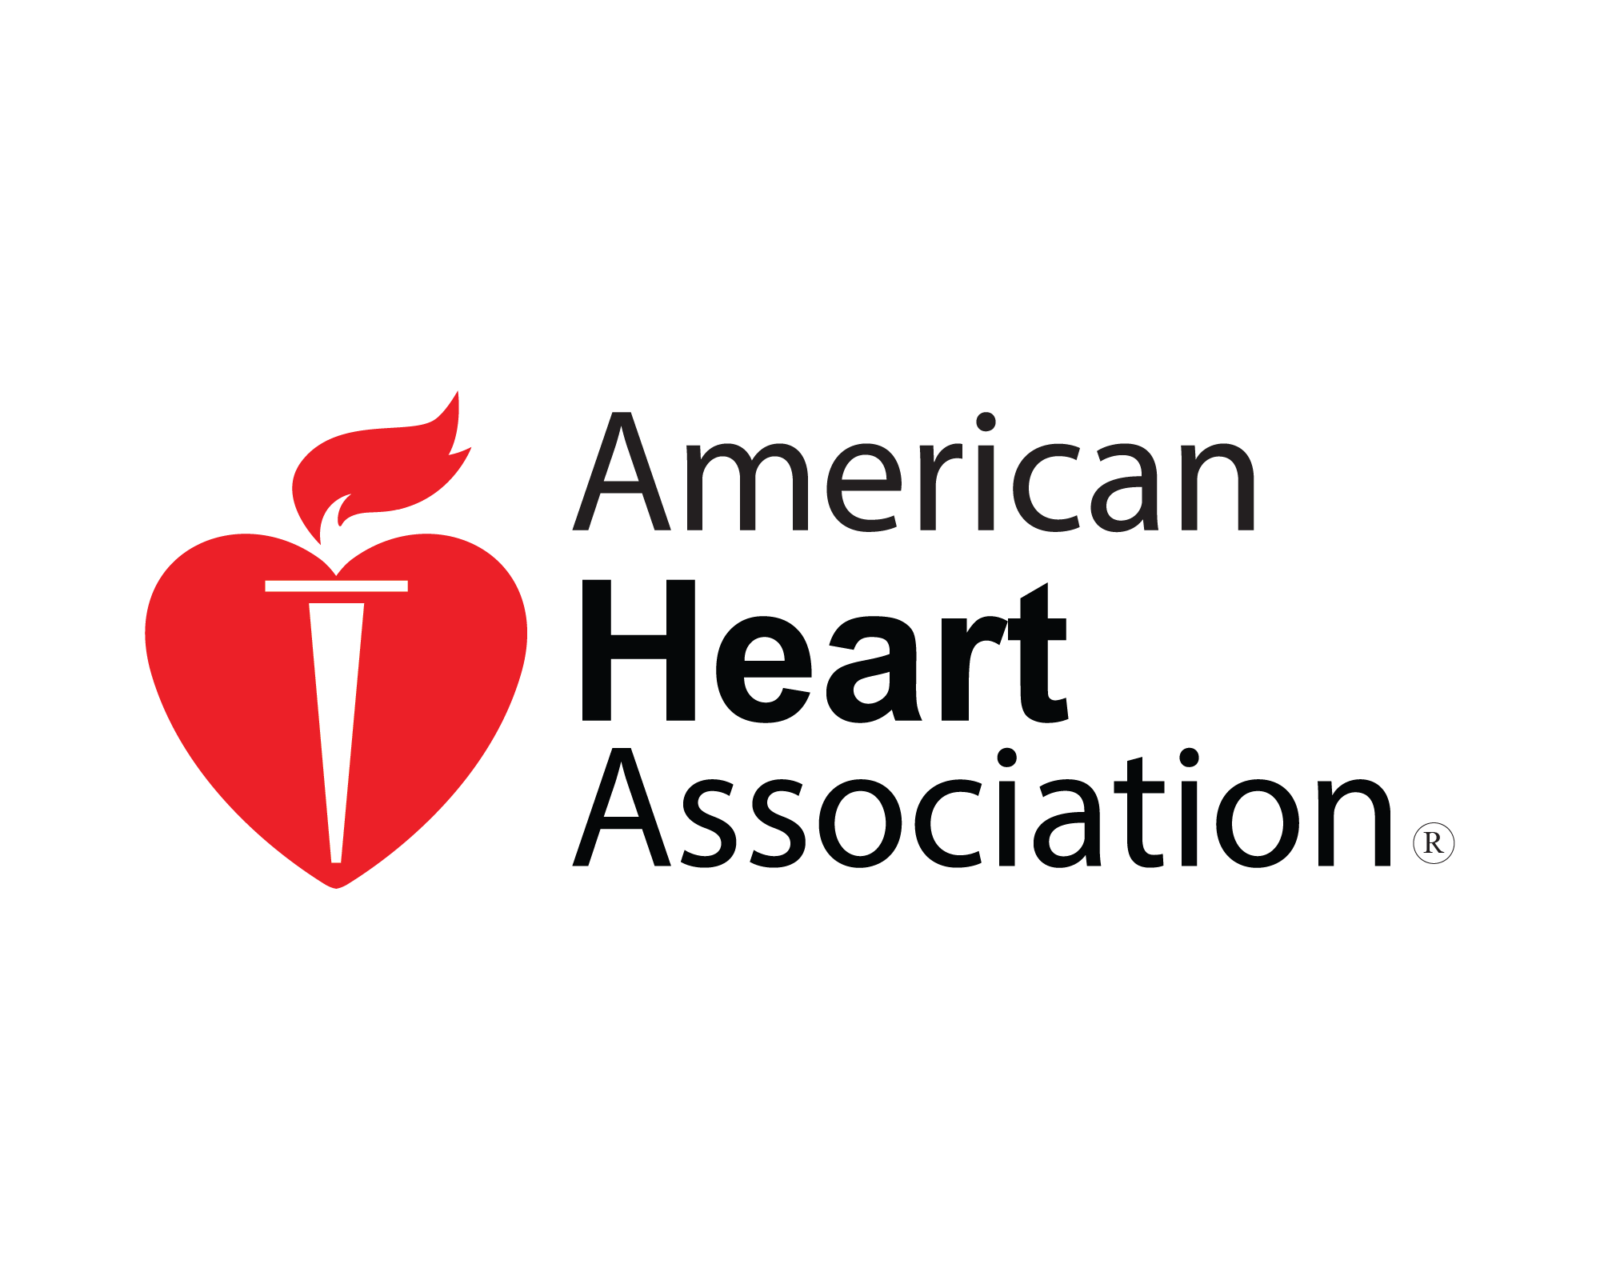 Inspiration American Heart Association Logo Facts Meaning History